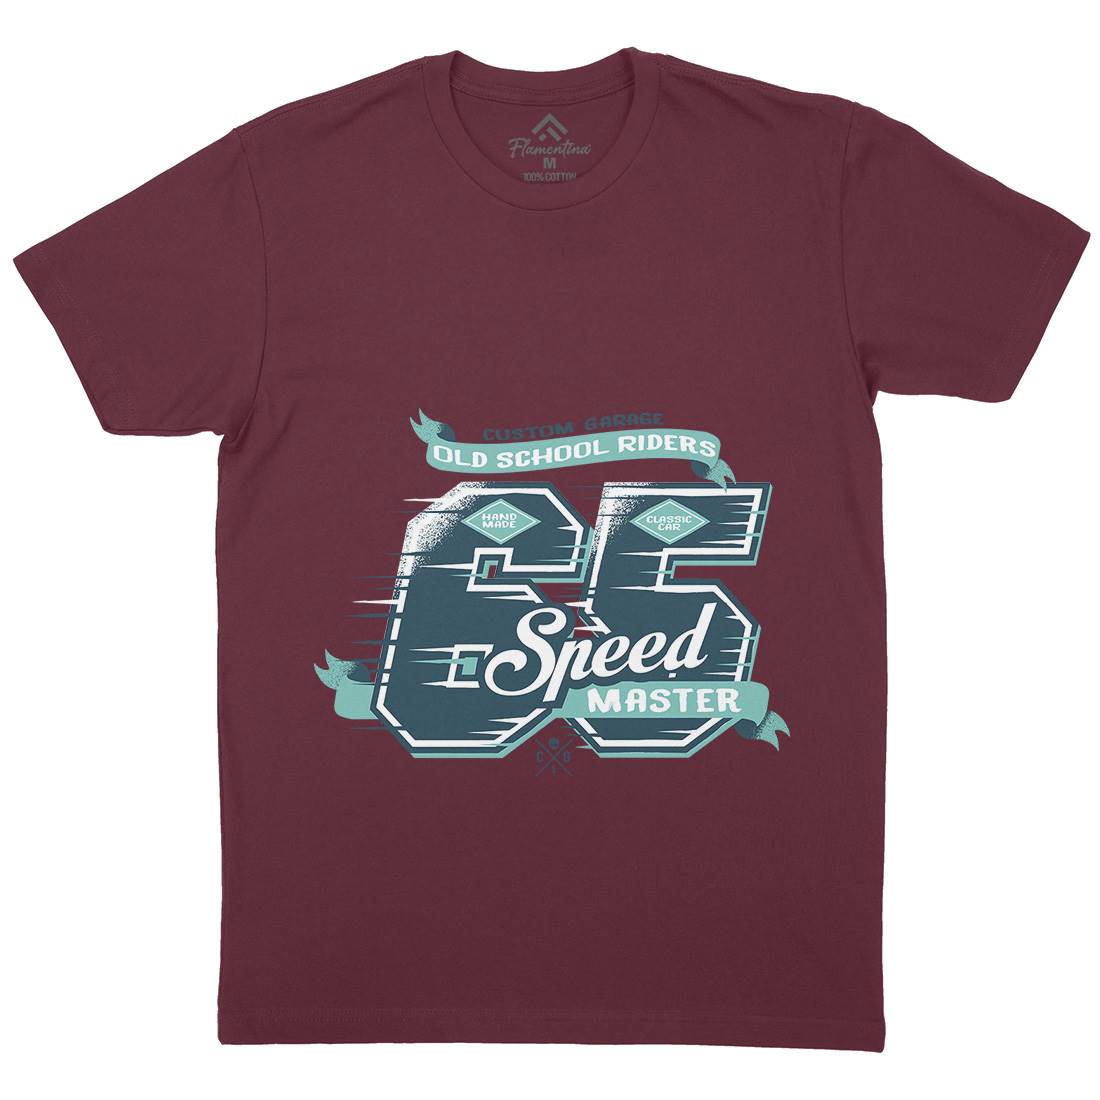 65 Speed Mens Crew Neck T-Shirt Motorcycles A982